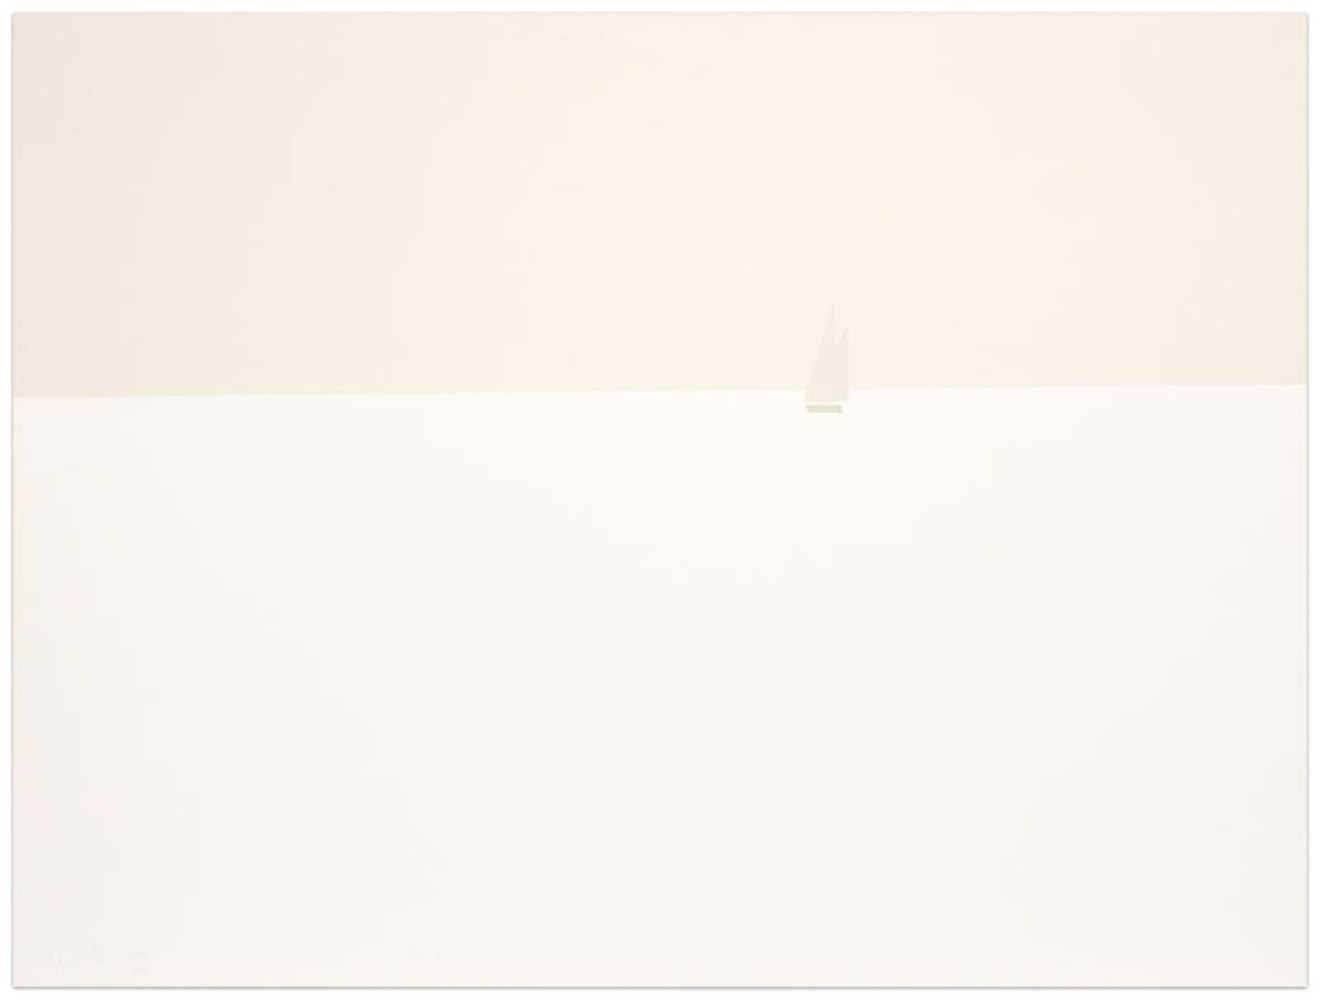 Provincetown: Late Afternoon II (Beige), 1974

screenprint in three colors, edition of 60

18 x 24 in. / 45.7 x 61 cm